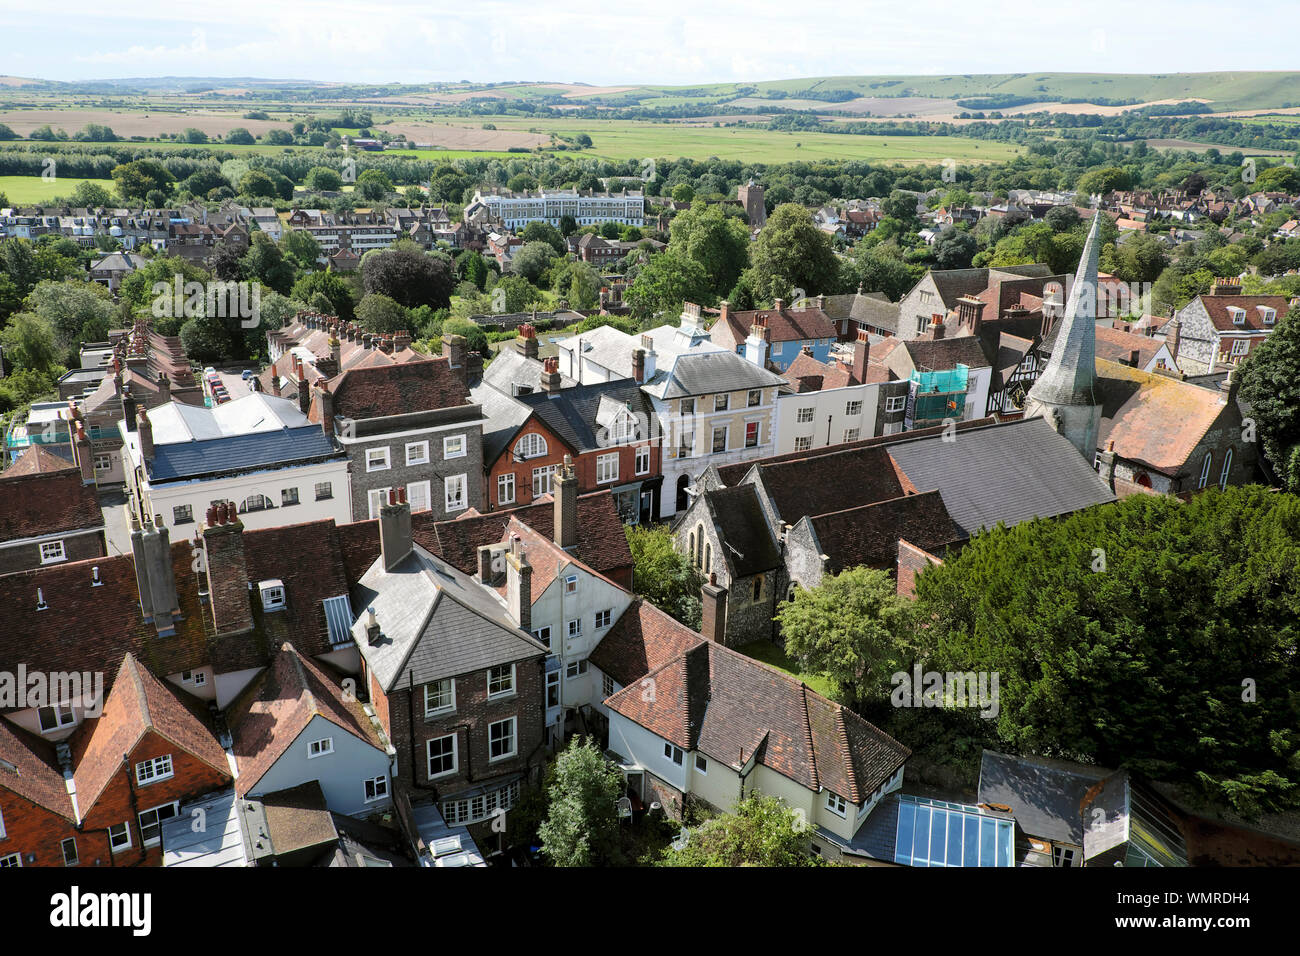 View of Lewes town, church spire, houses, rooftops and countryside landscape from Lewes Castle South Tower in East Sussex England UK  KATHY DEWITT Stock Photo